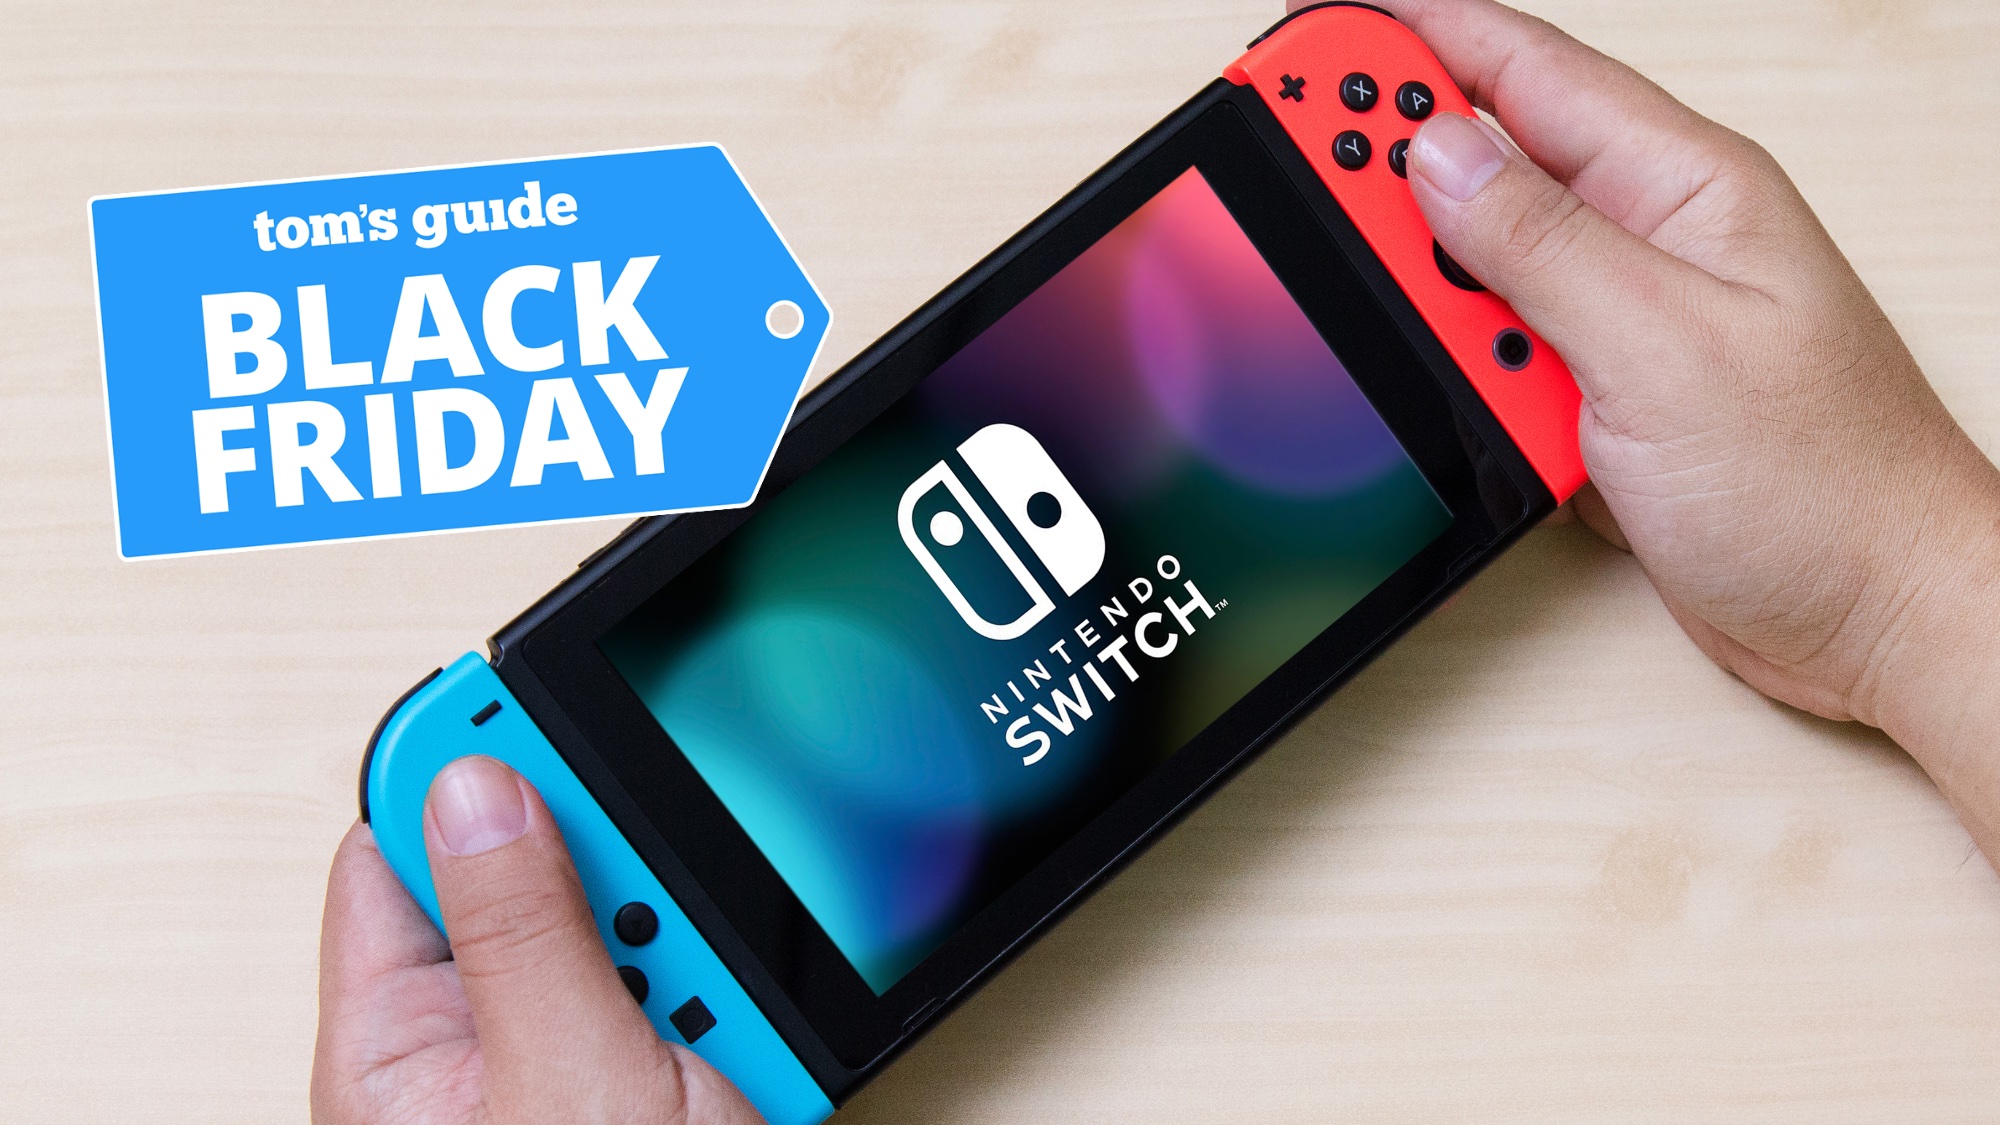 10 MORE EARLY BLACK FRIDAY Nintendo Switch eSHOP SALES ON NOW